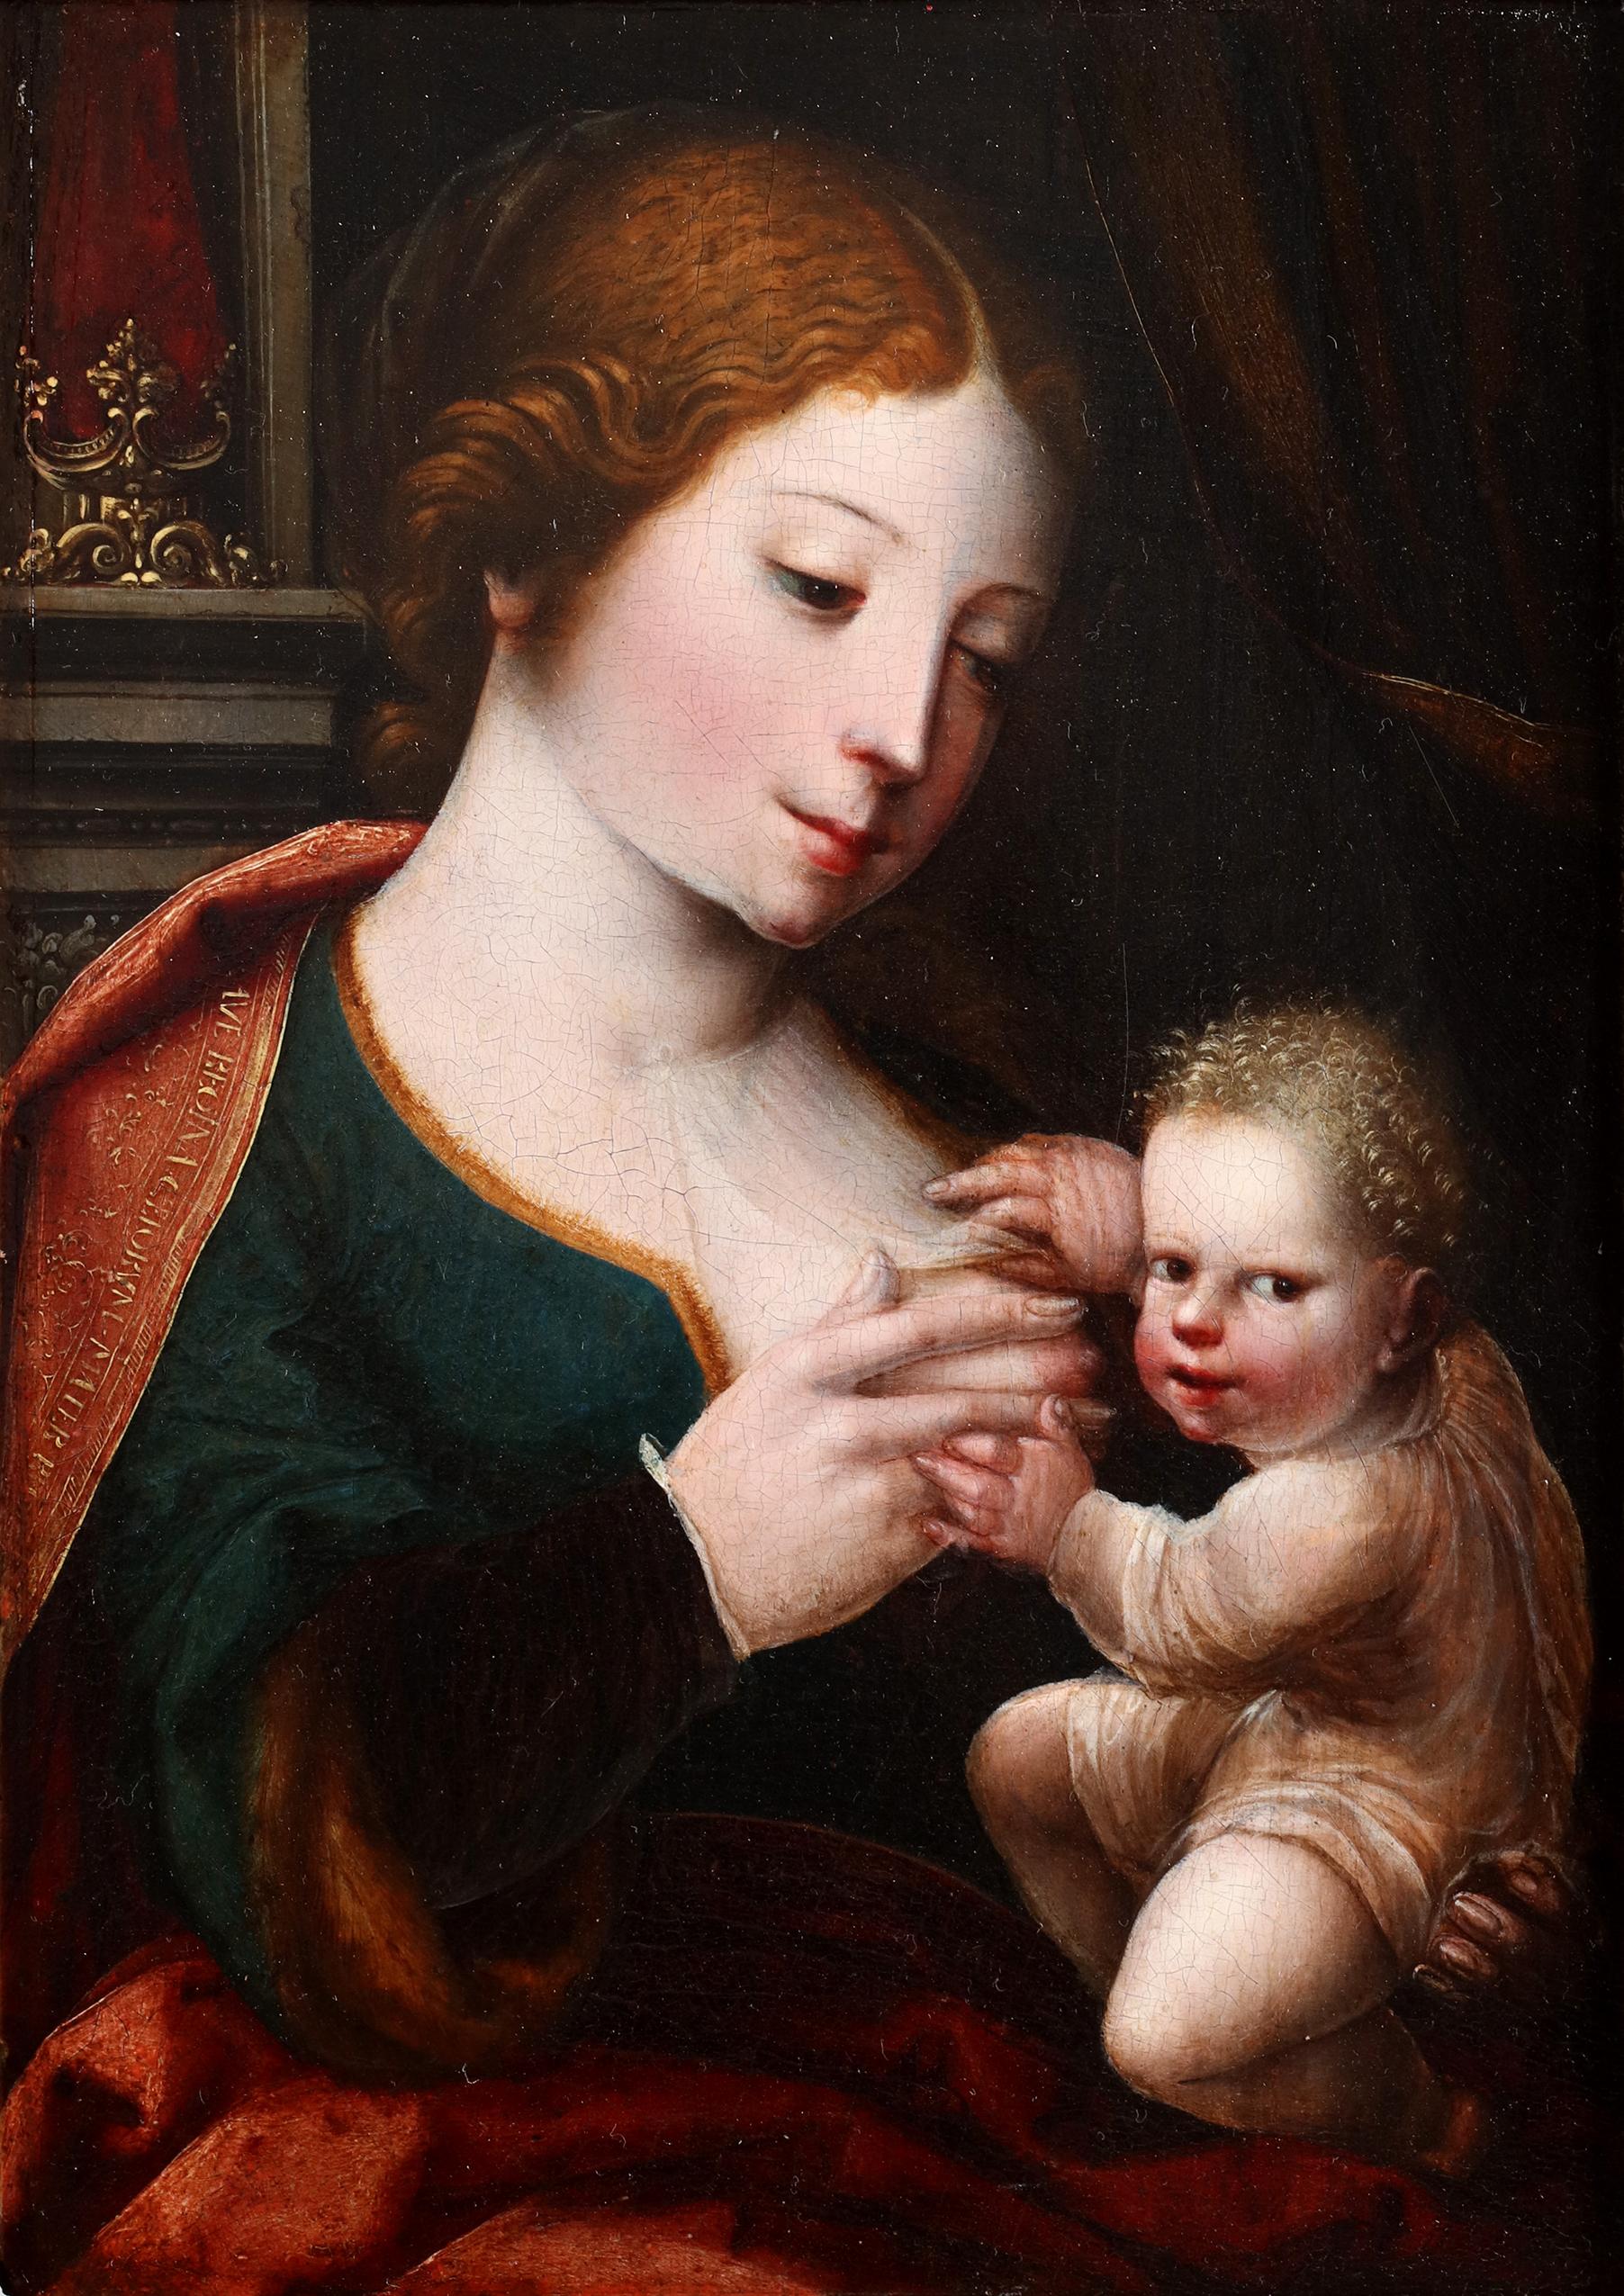 Virgin and Child - (Attr.) to Master with the Parrot (active 1520 - 1540)